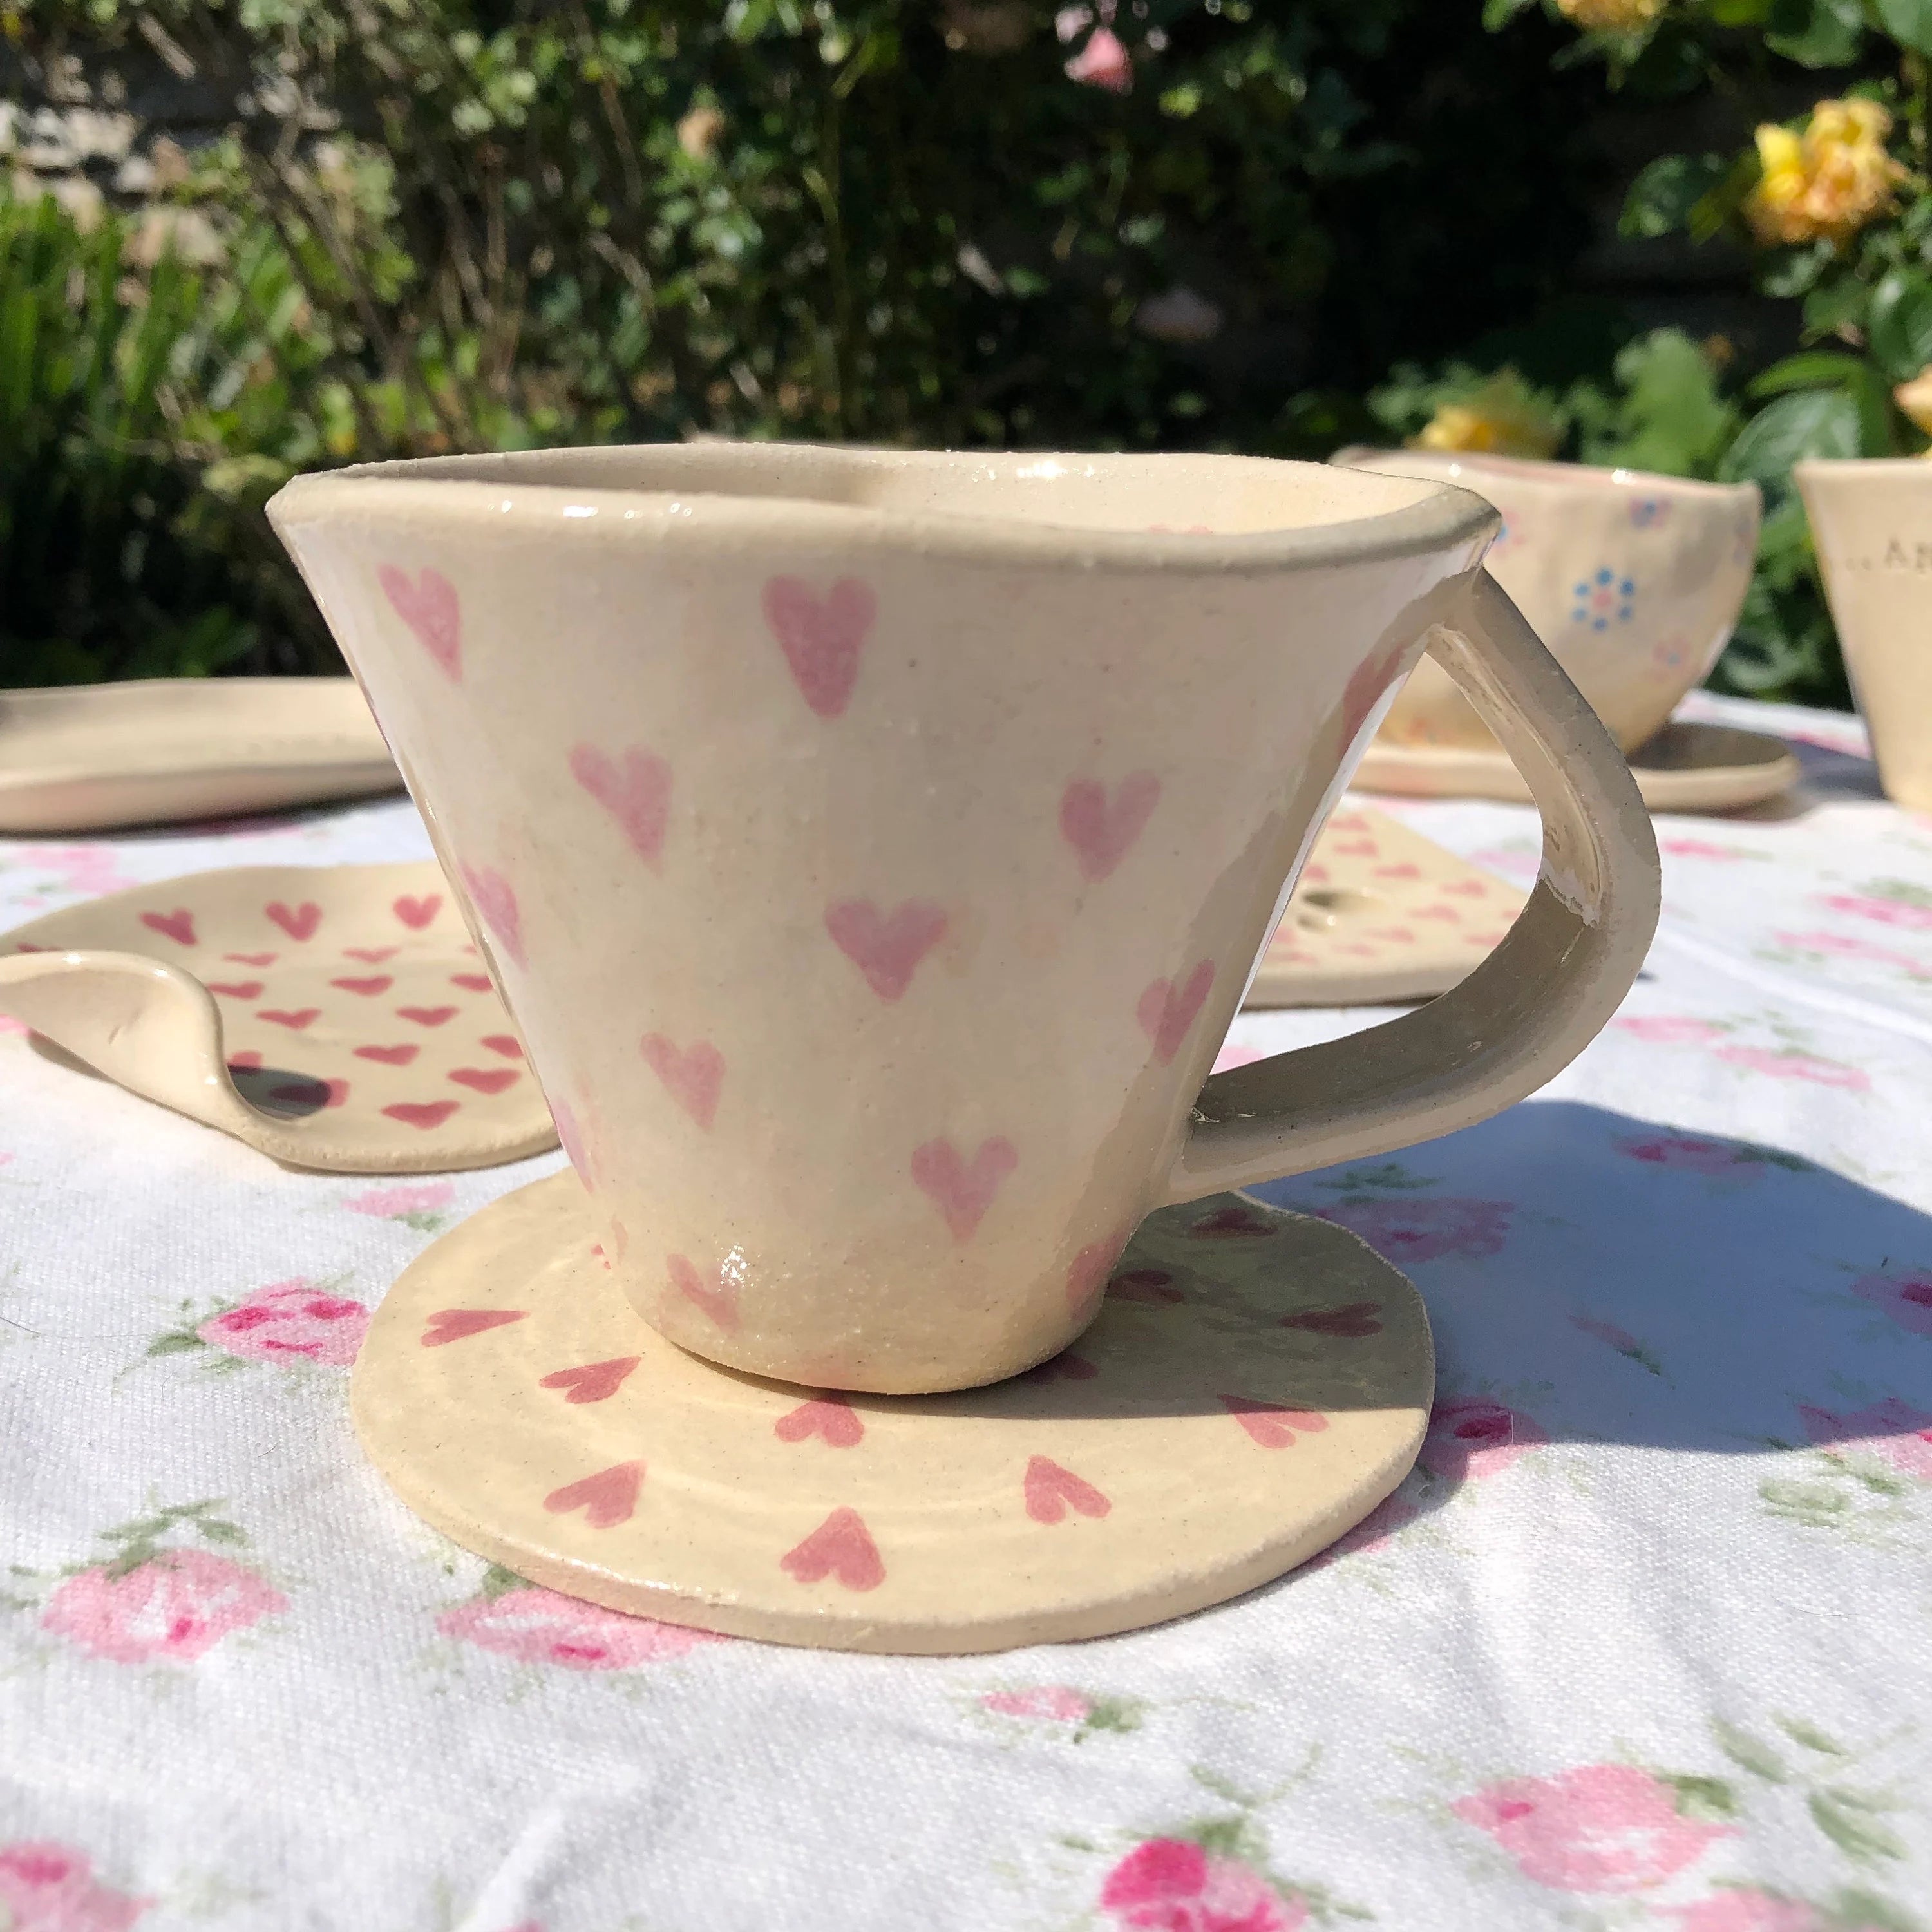 Hand Built Ceramic Stoneware Heart Hug Cup and Saucer